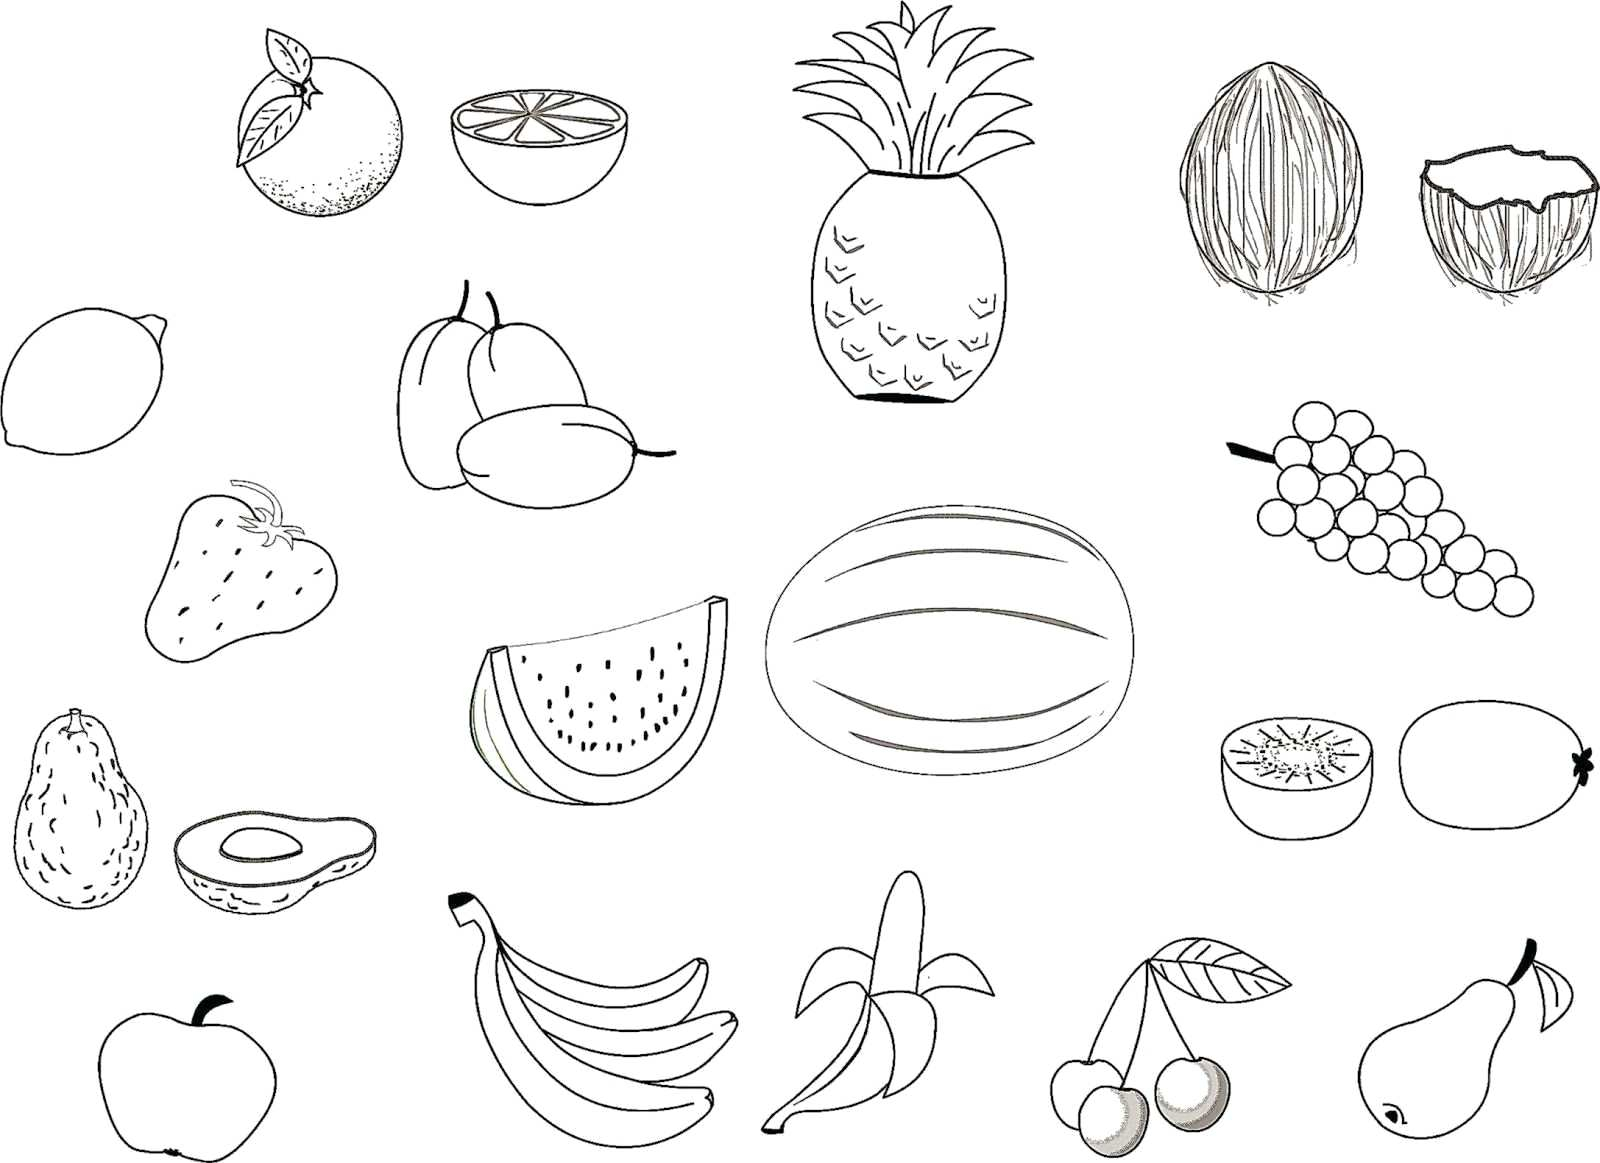 Vegetables Coloring Page Printable Coloring Pages Of Fruits And Vegetables Lagunapaperco